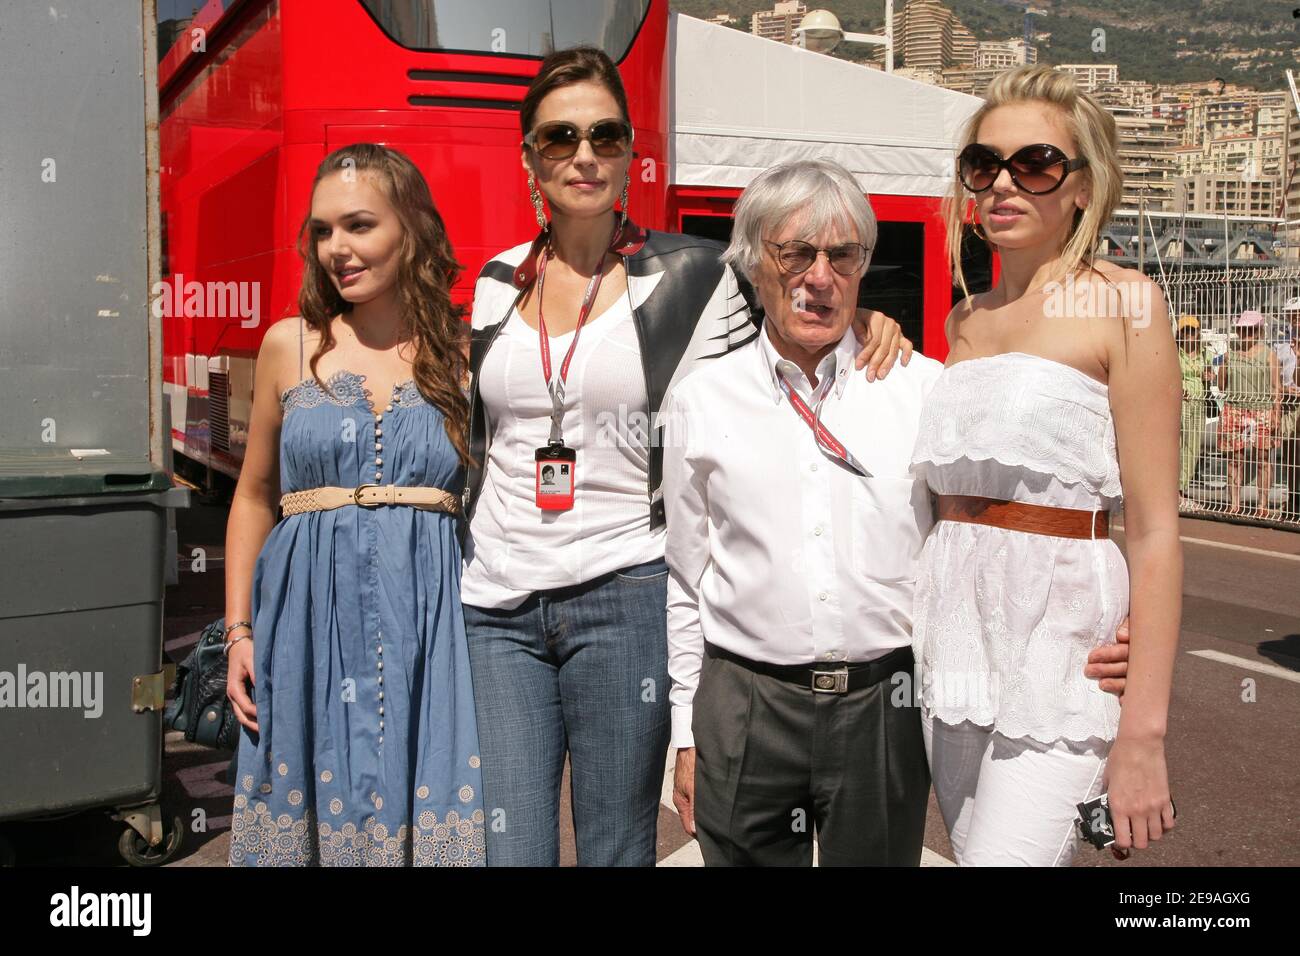 FOM boss Bernie Ecclestone poses with his wife Slavica and their daughters Tamara and Petra in the paddock of the 2006 Monaco Formula 1 Grand Prix in Monte-Carlo on May 28, 2006. Photo by Frederic Nebinger/ABACAPRESS.COM Stock Photo